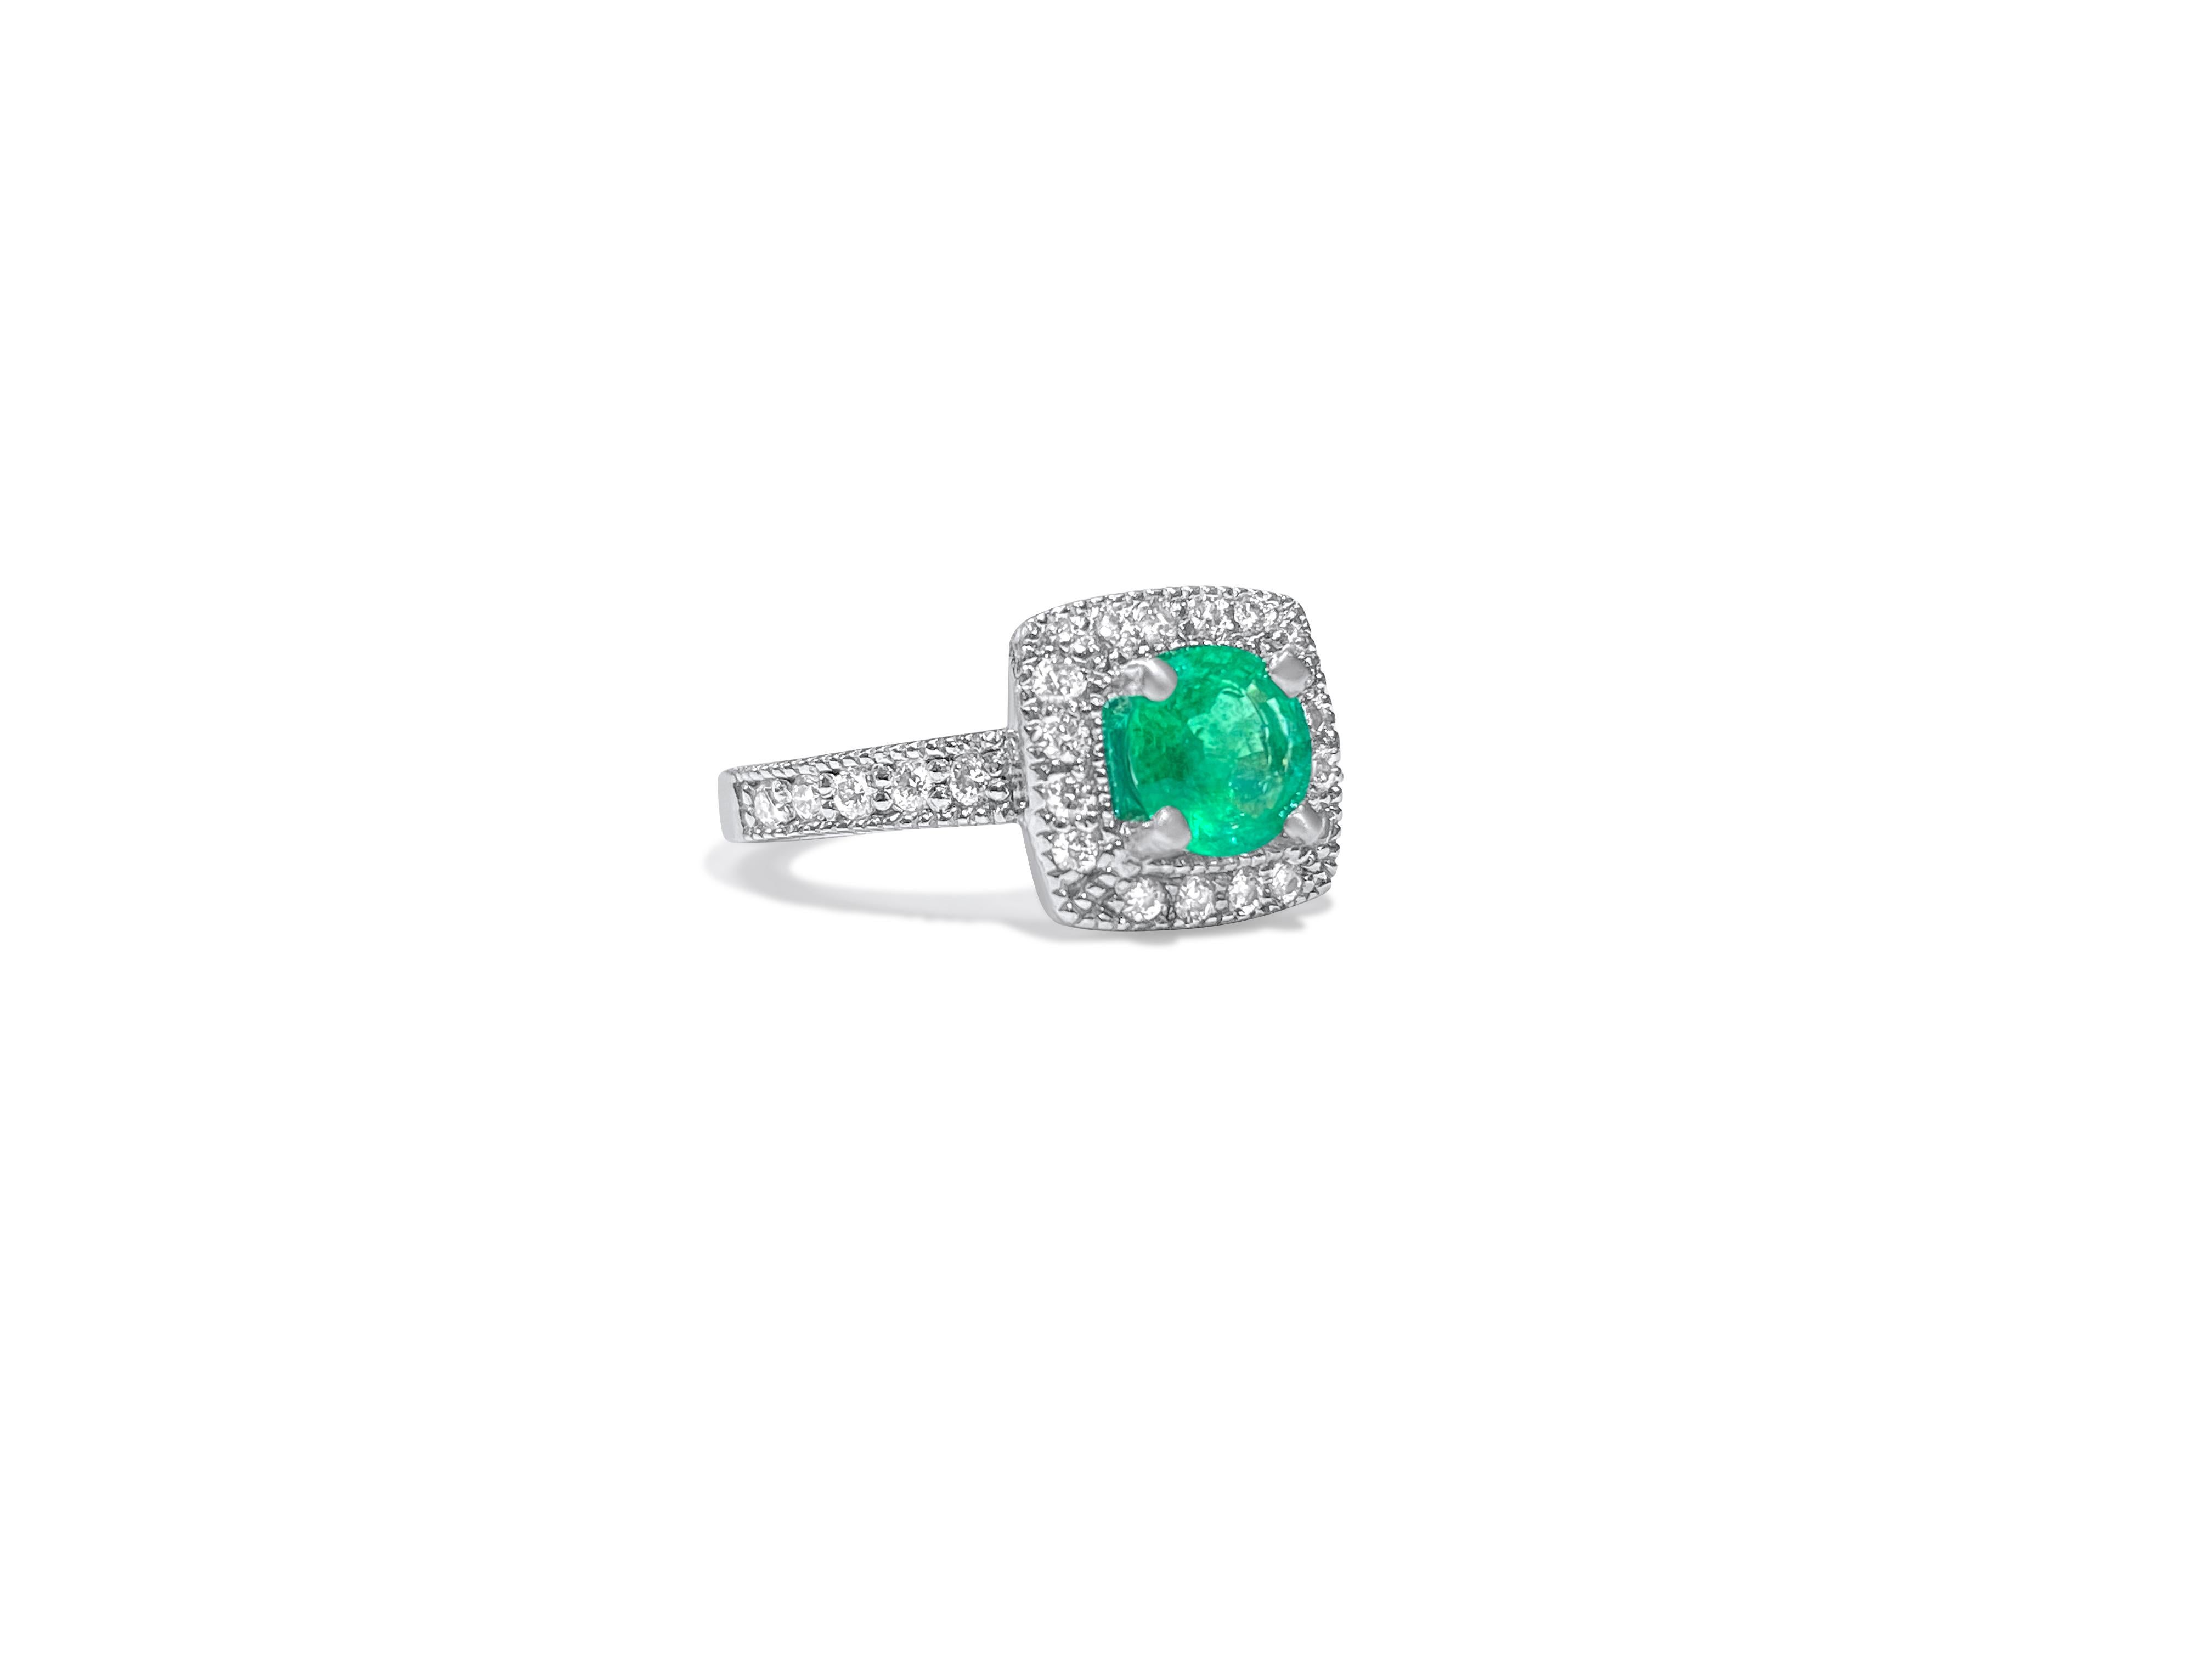 Empire Womens 2.10 Carat Natural Emerald and Diamond Ring in 14 Karat White Gold For Sale